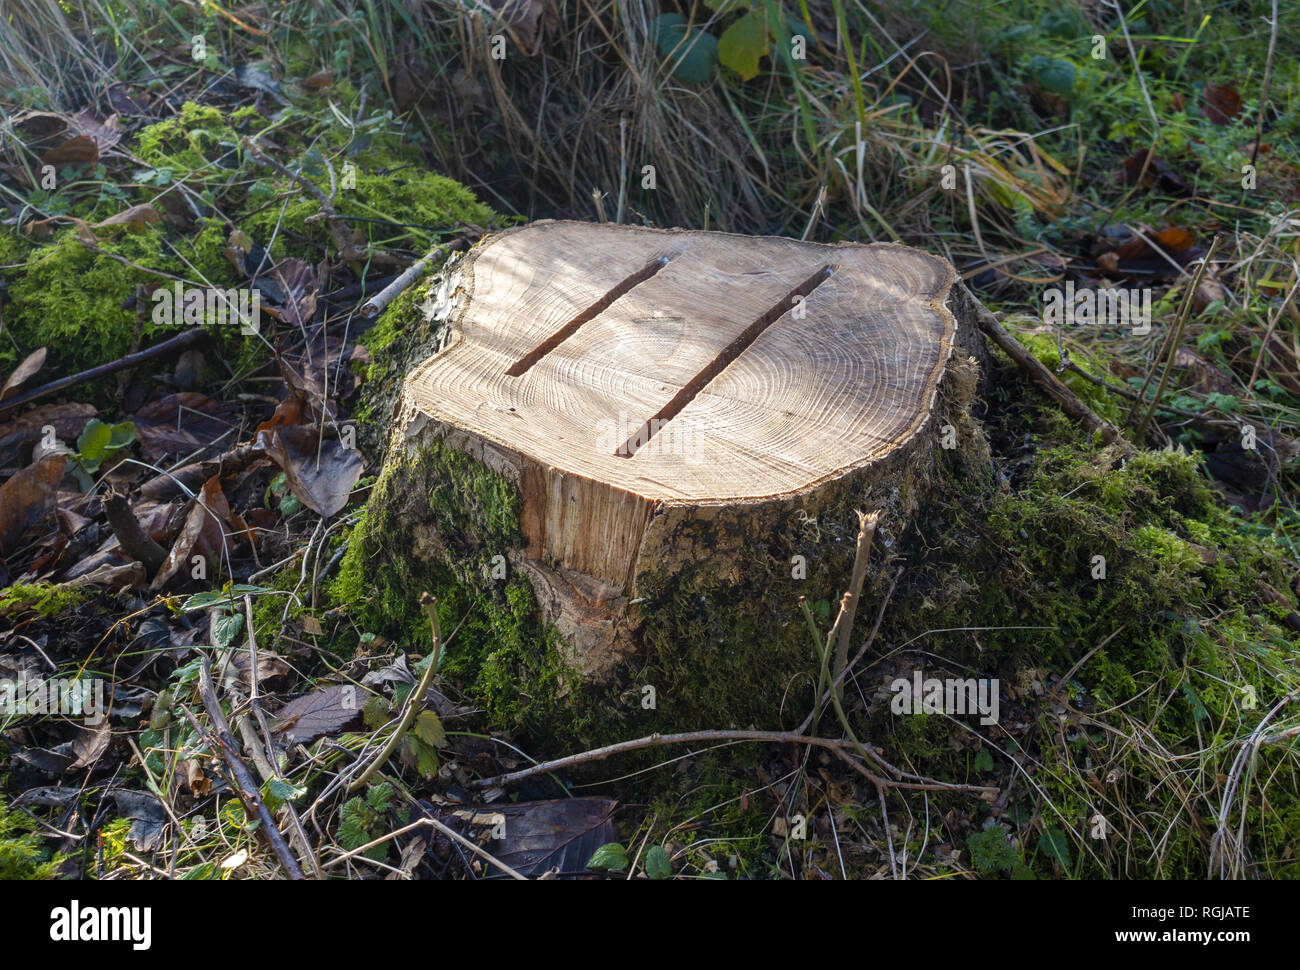 Two deep gashes cut into tree stump to prevent growth Stock Photo